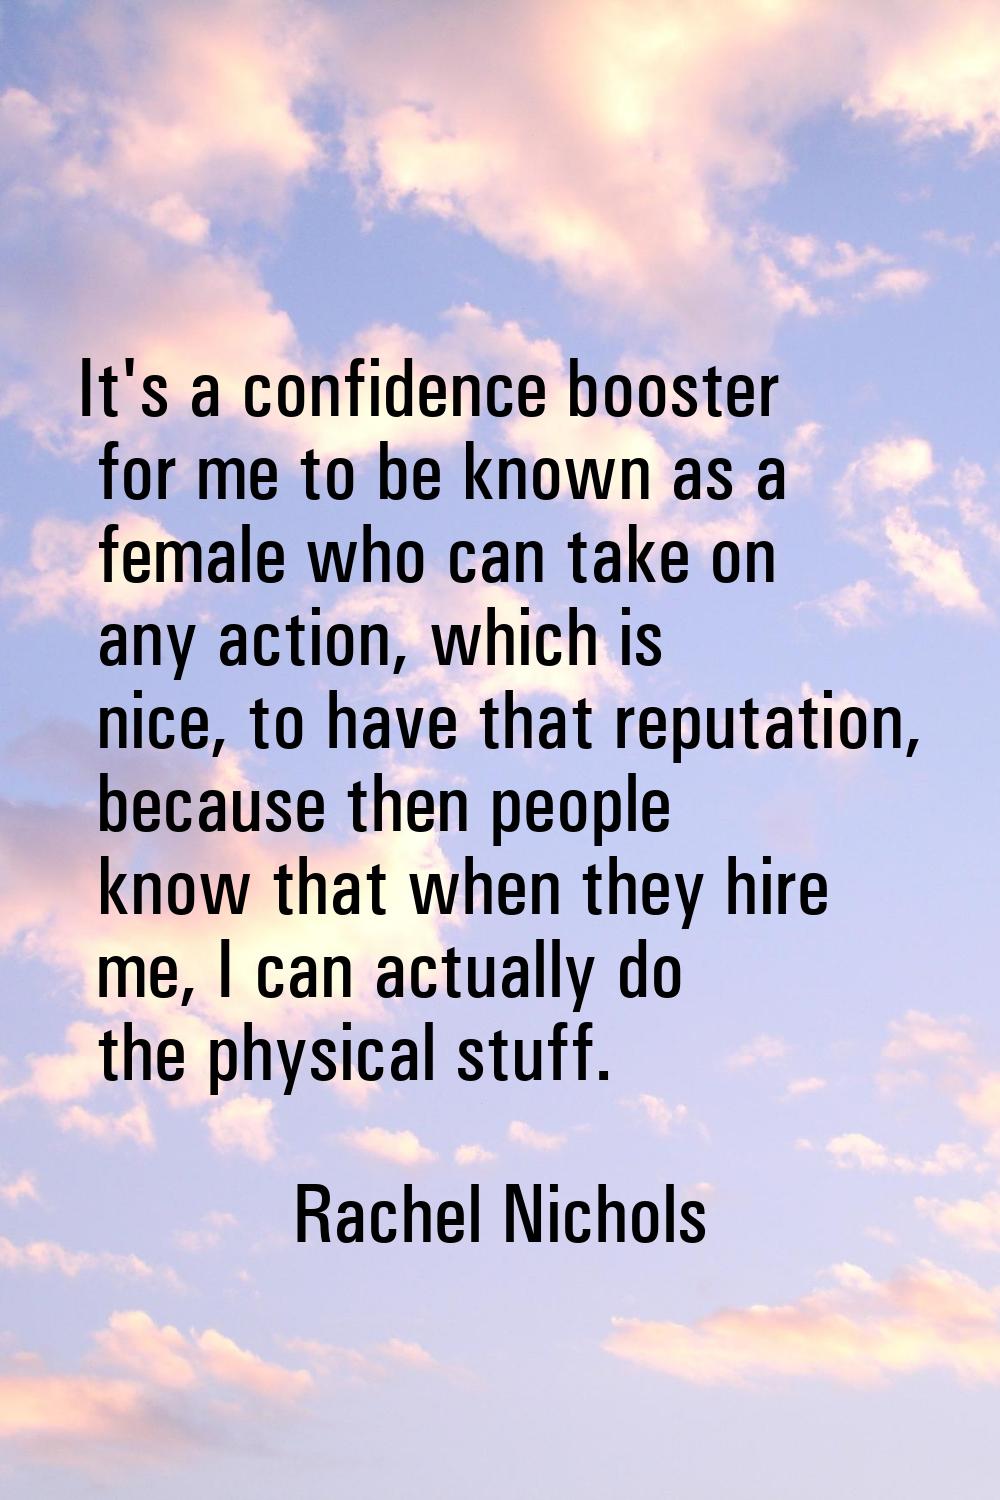 It's a confidence booster for me to be known as a female who can take on any action, which is nice,